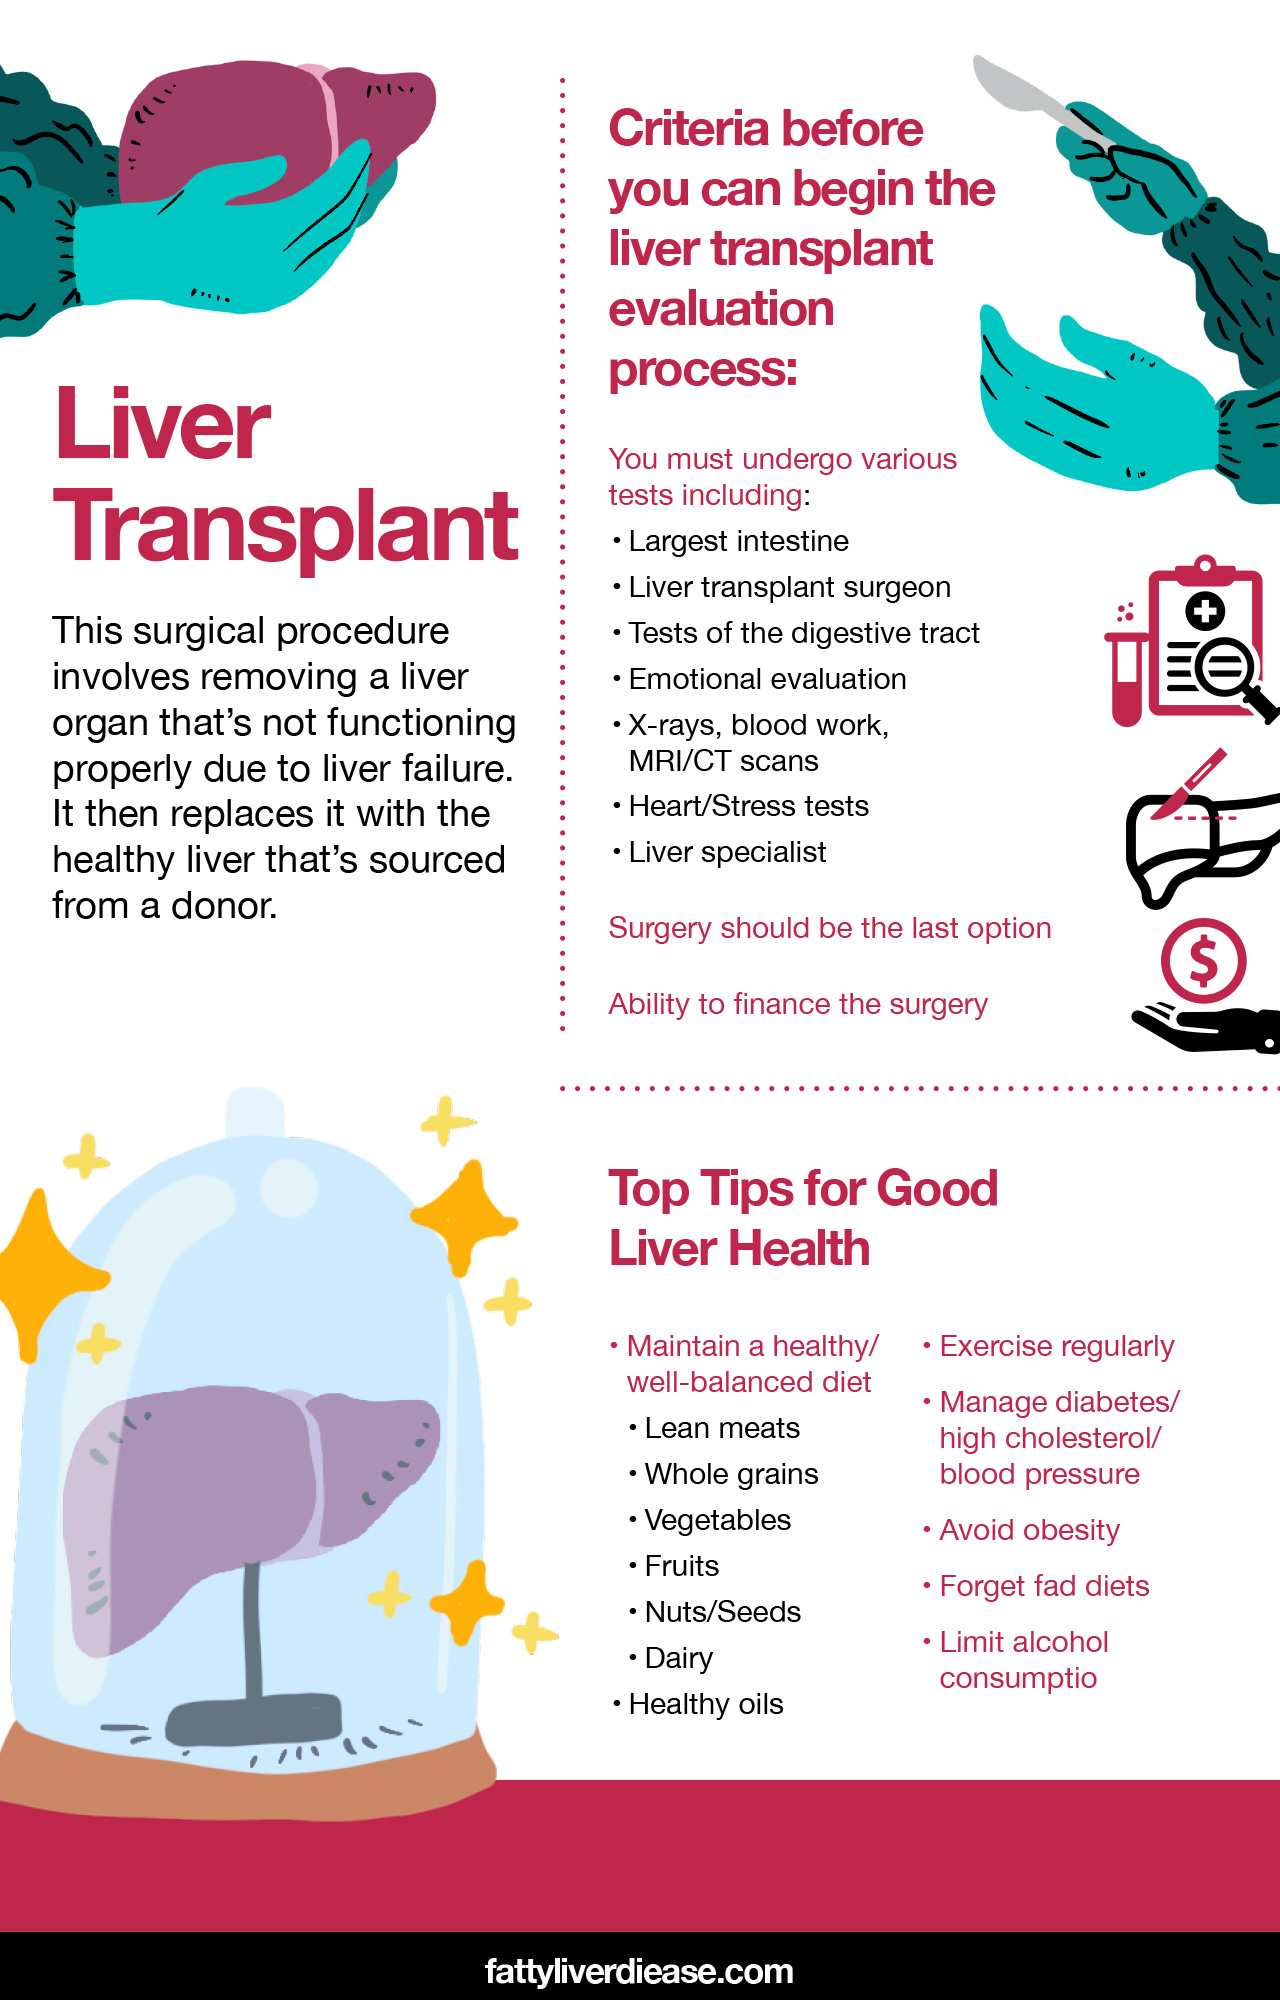 Liver Transplant List of Rules and Requirements